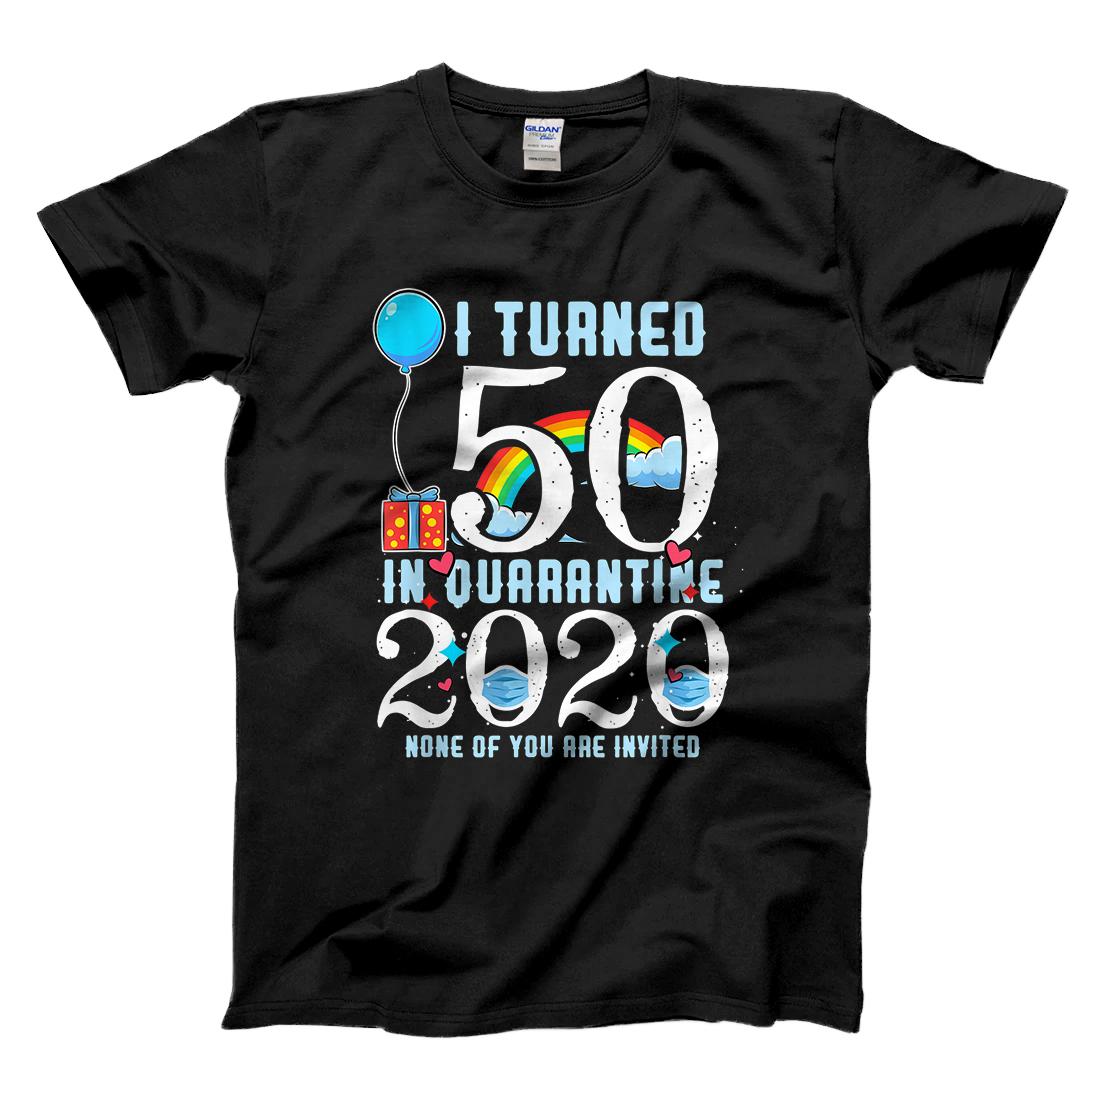 Personalized I Turned 50 in Quarantine Cute 50th Birthday Gift T-Shirt